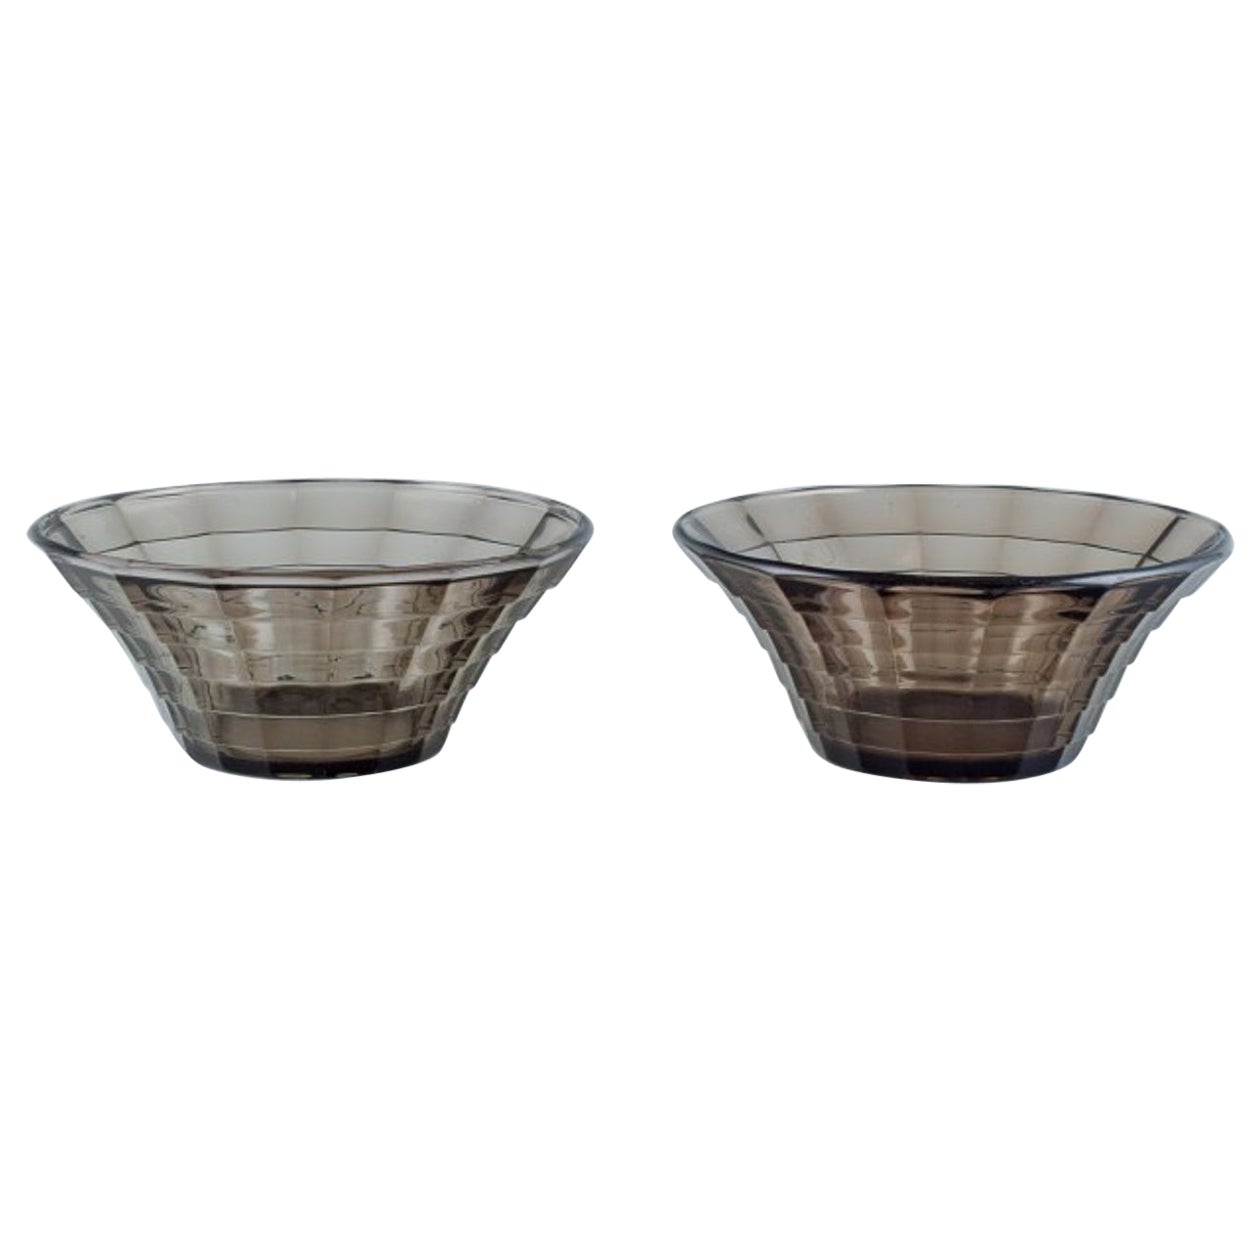 Simon Gate for Orrefors. Two large bowls in smoked-coloured pressed glass. For Sale